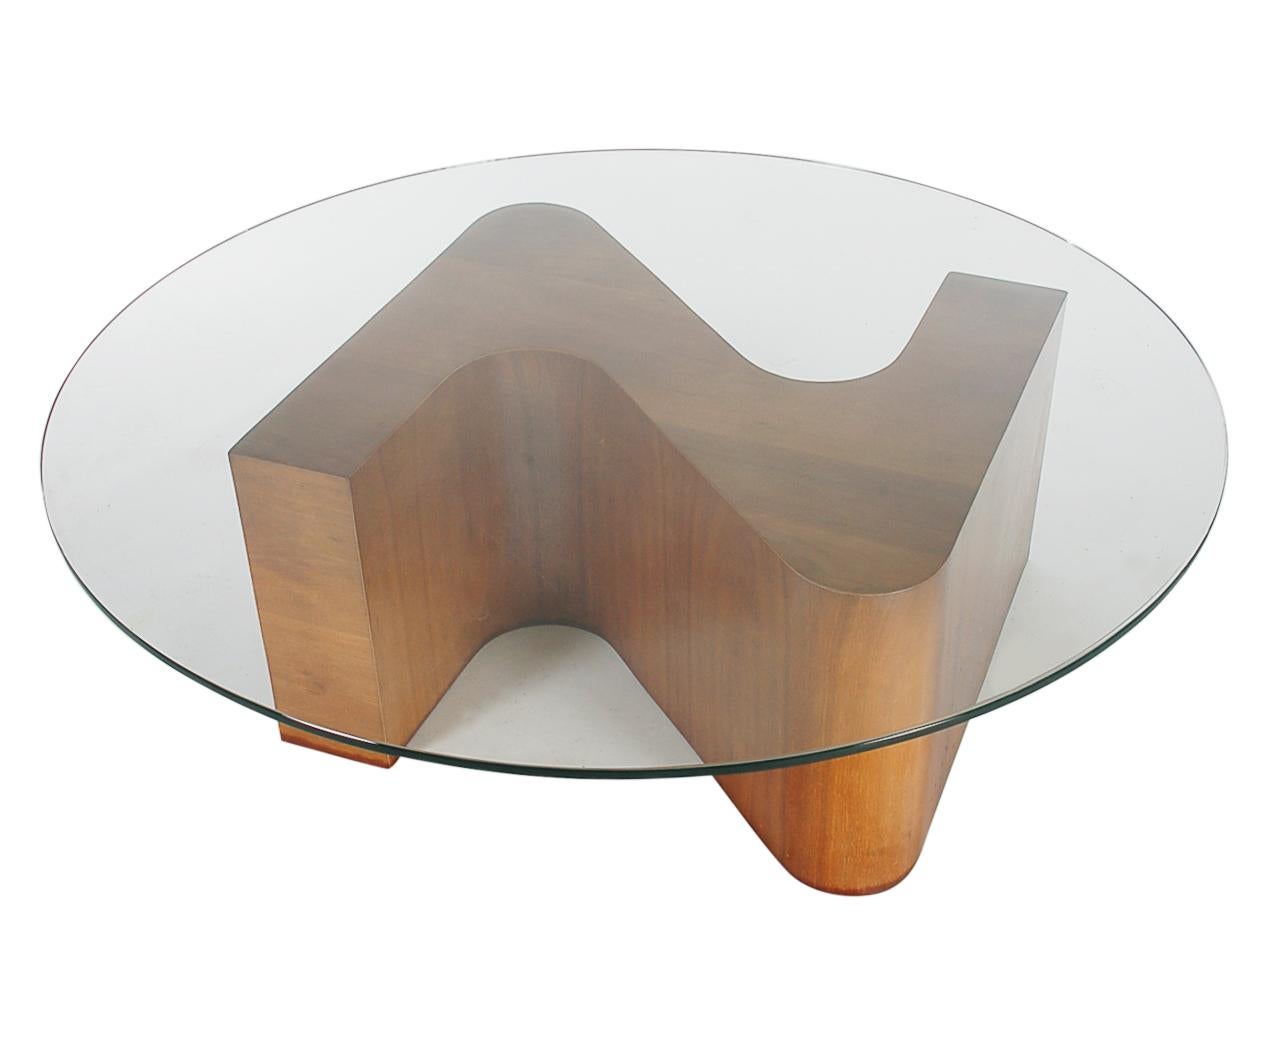 A 48 inch circular cocktail table from the 1960s. It features a sculptural form base in American walnut, with a thick round clear glass top.